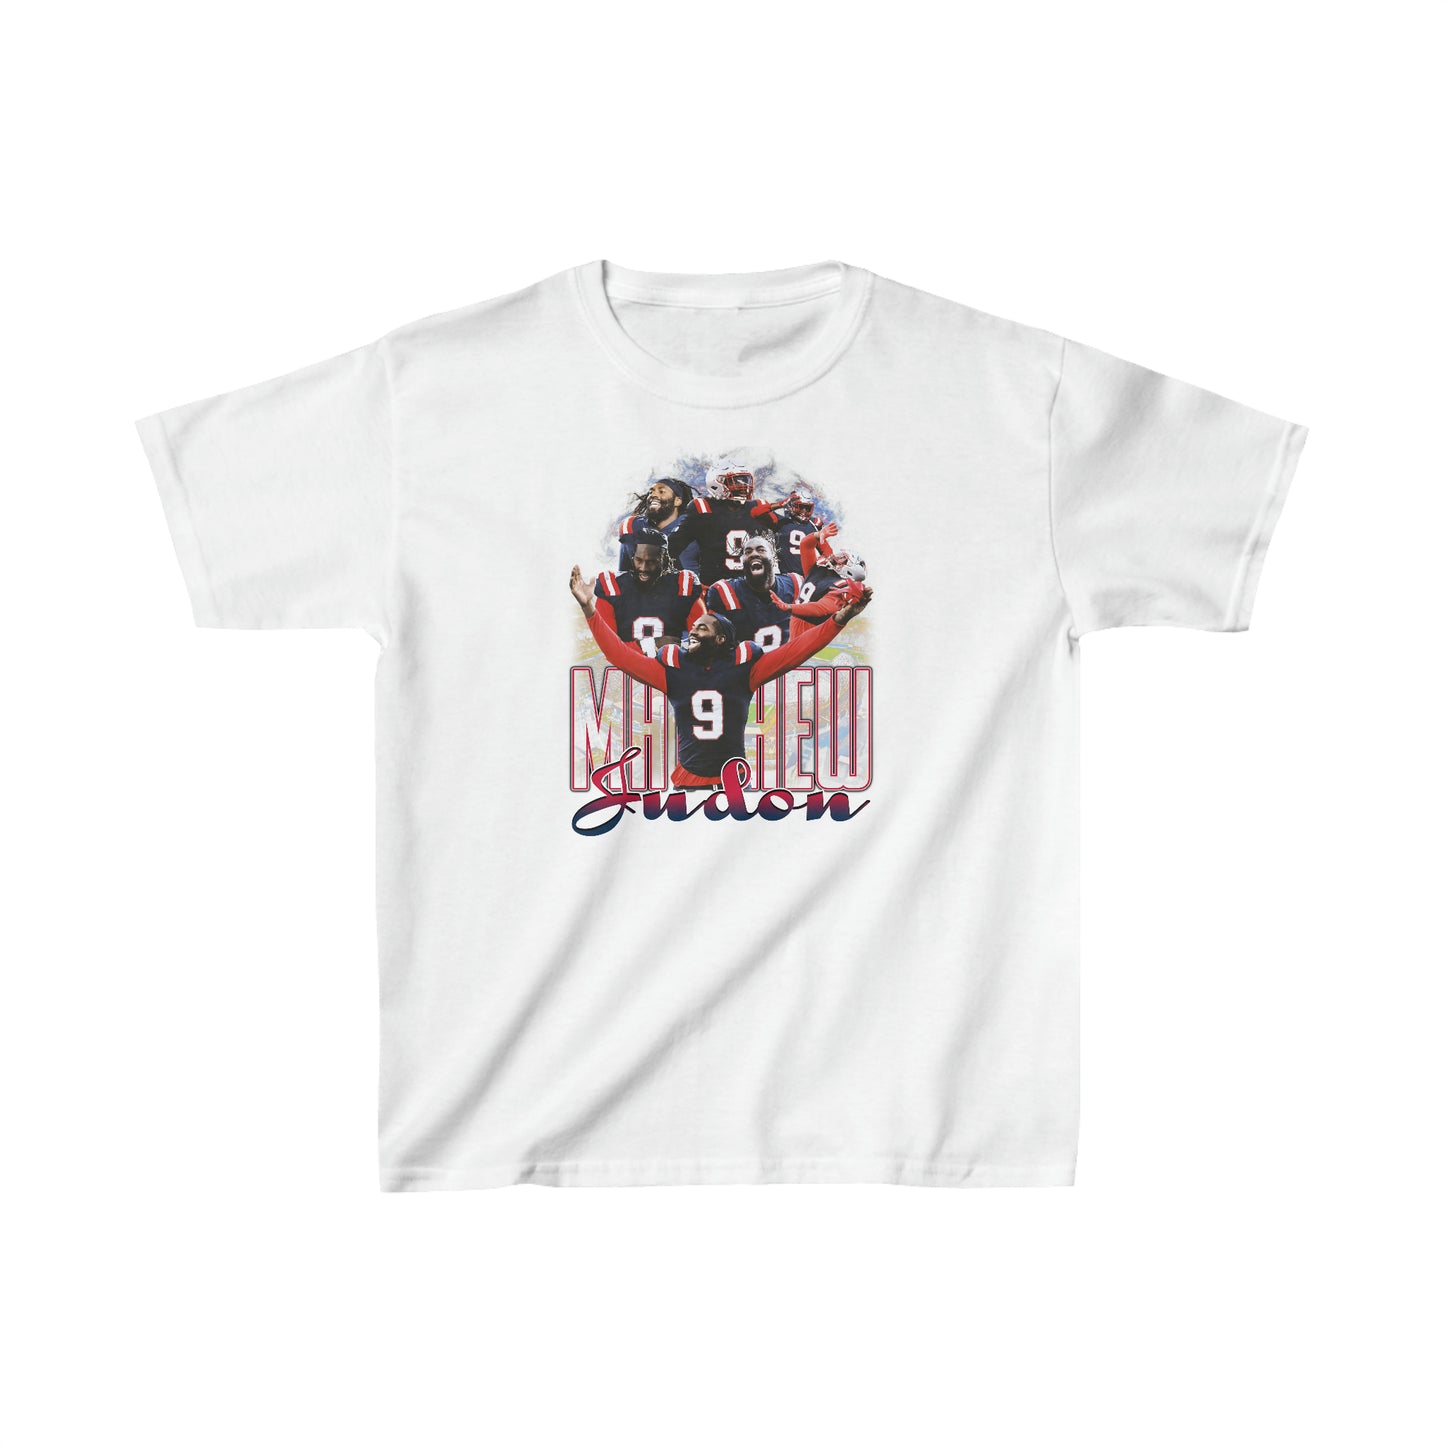 Youth WIY x Judon Vintage T-Shirt